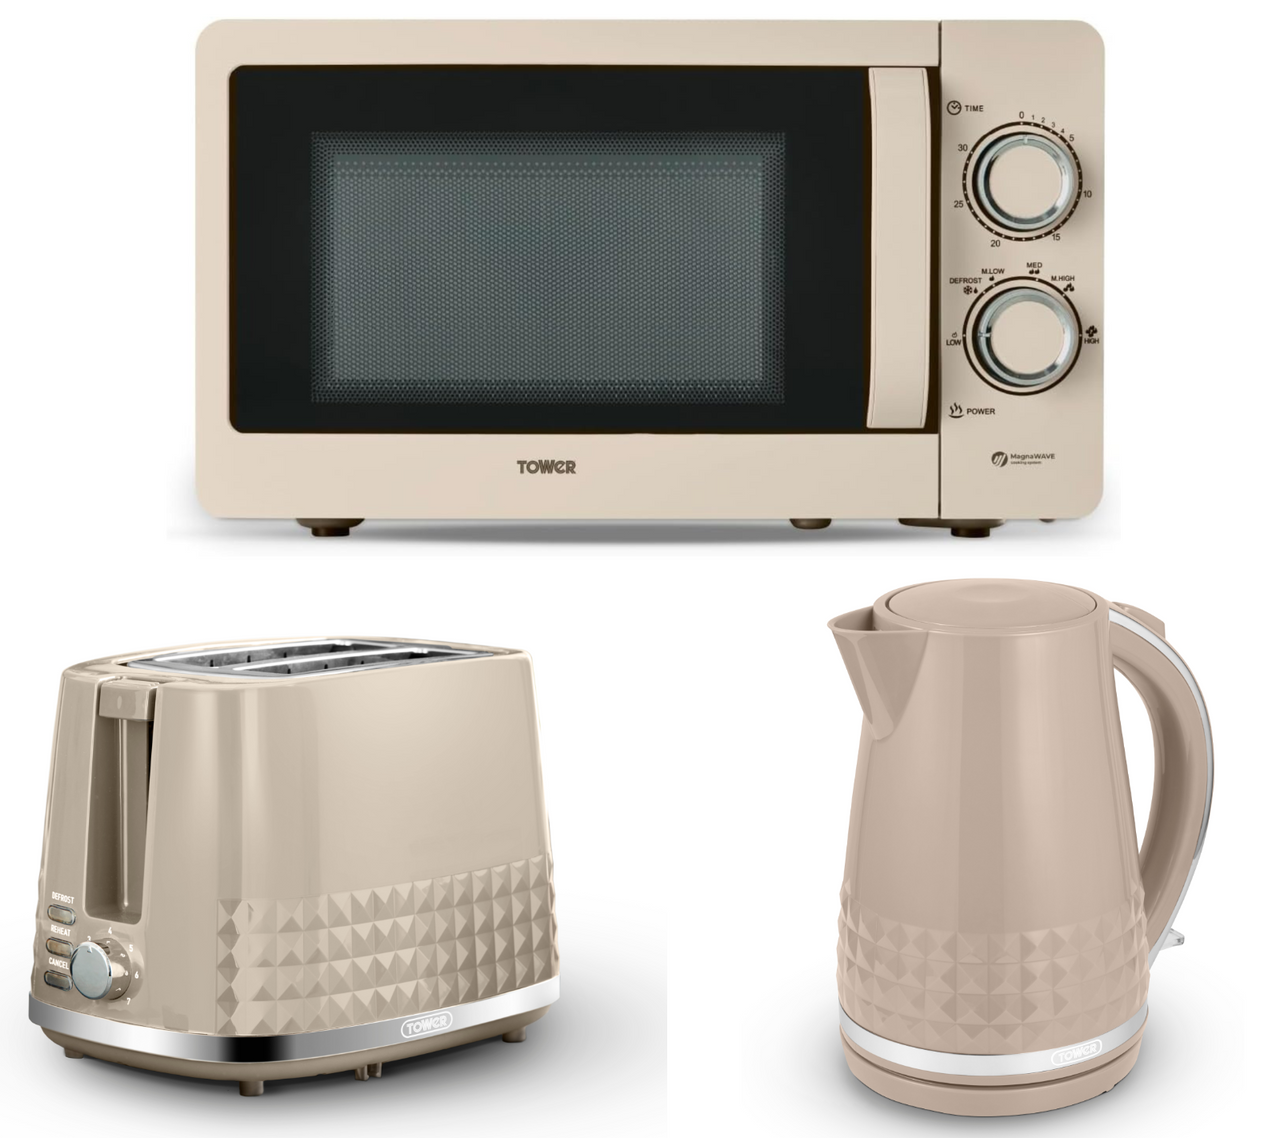 Tower Solitaire 1.5L 3KW Jug Kettle, 2 Slice Toaster & T24042MSH 800W Microwave Set in Latte & Chrome